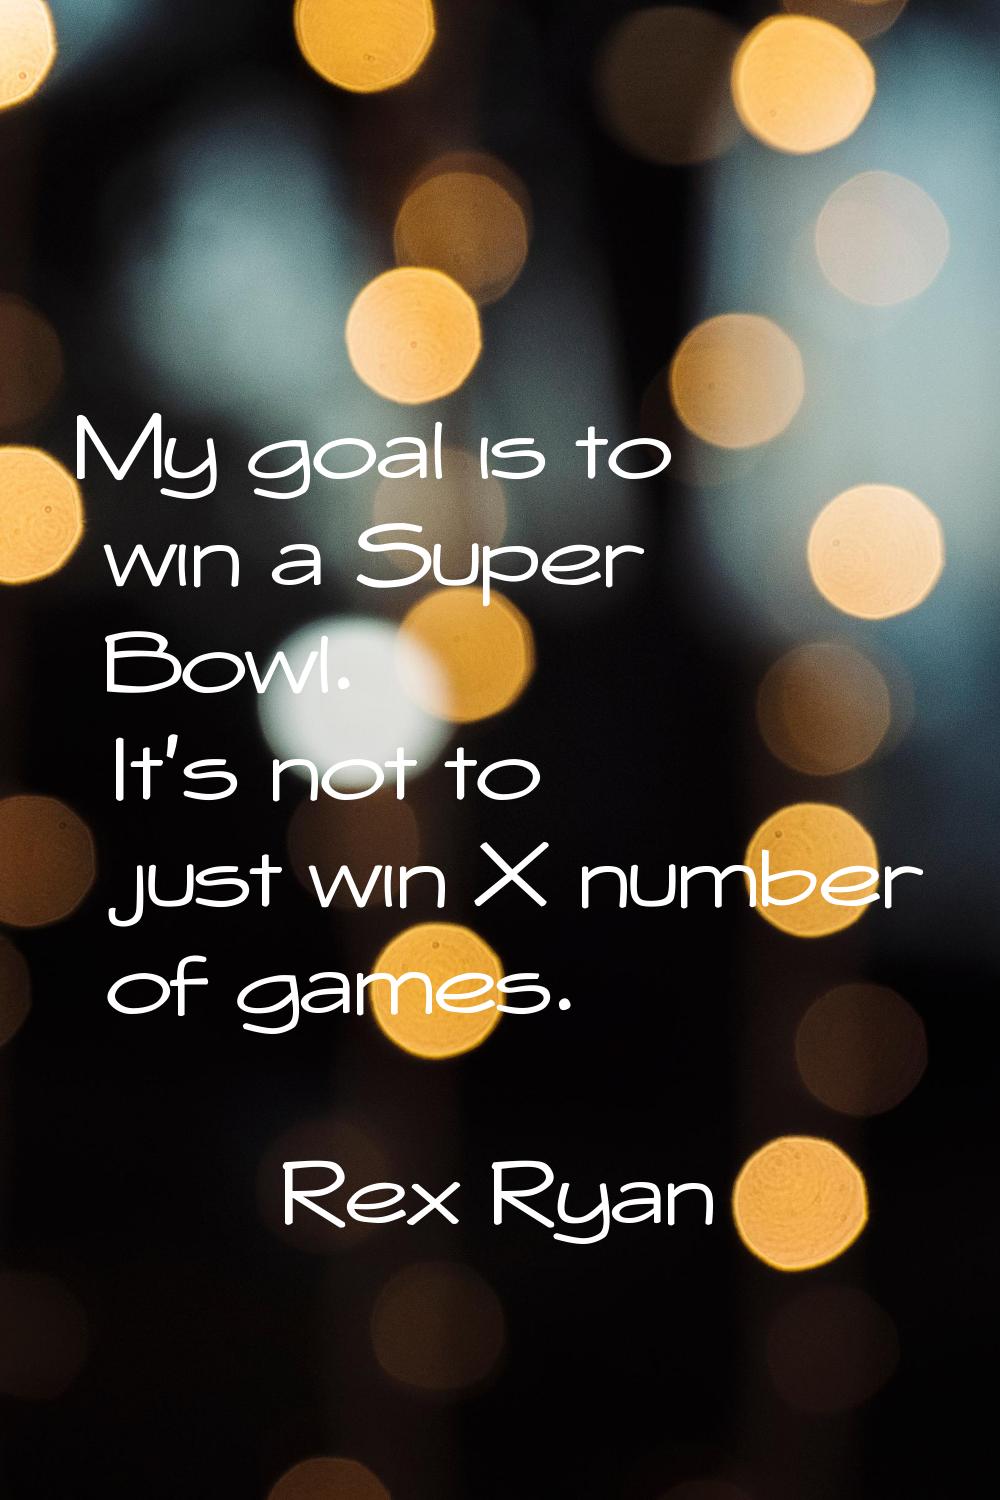 My goal is to win a Super Bowl. It's not to just win X number of games.